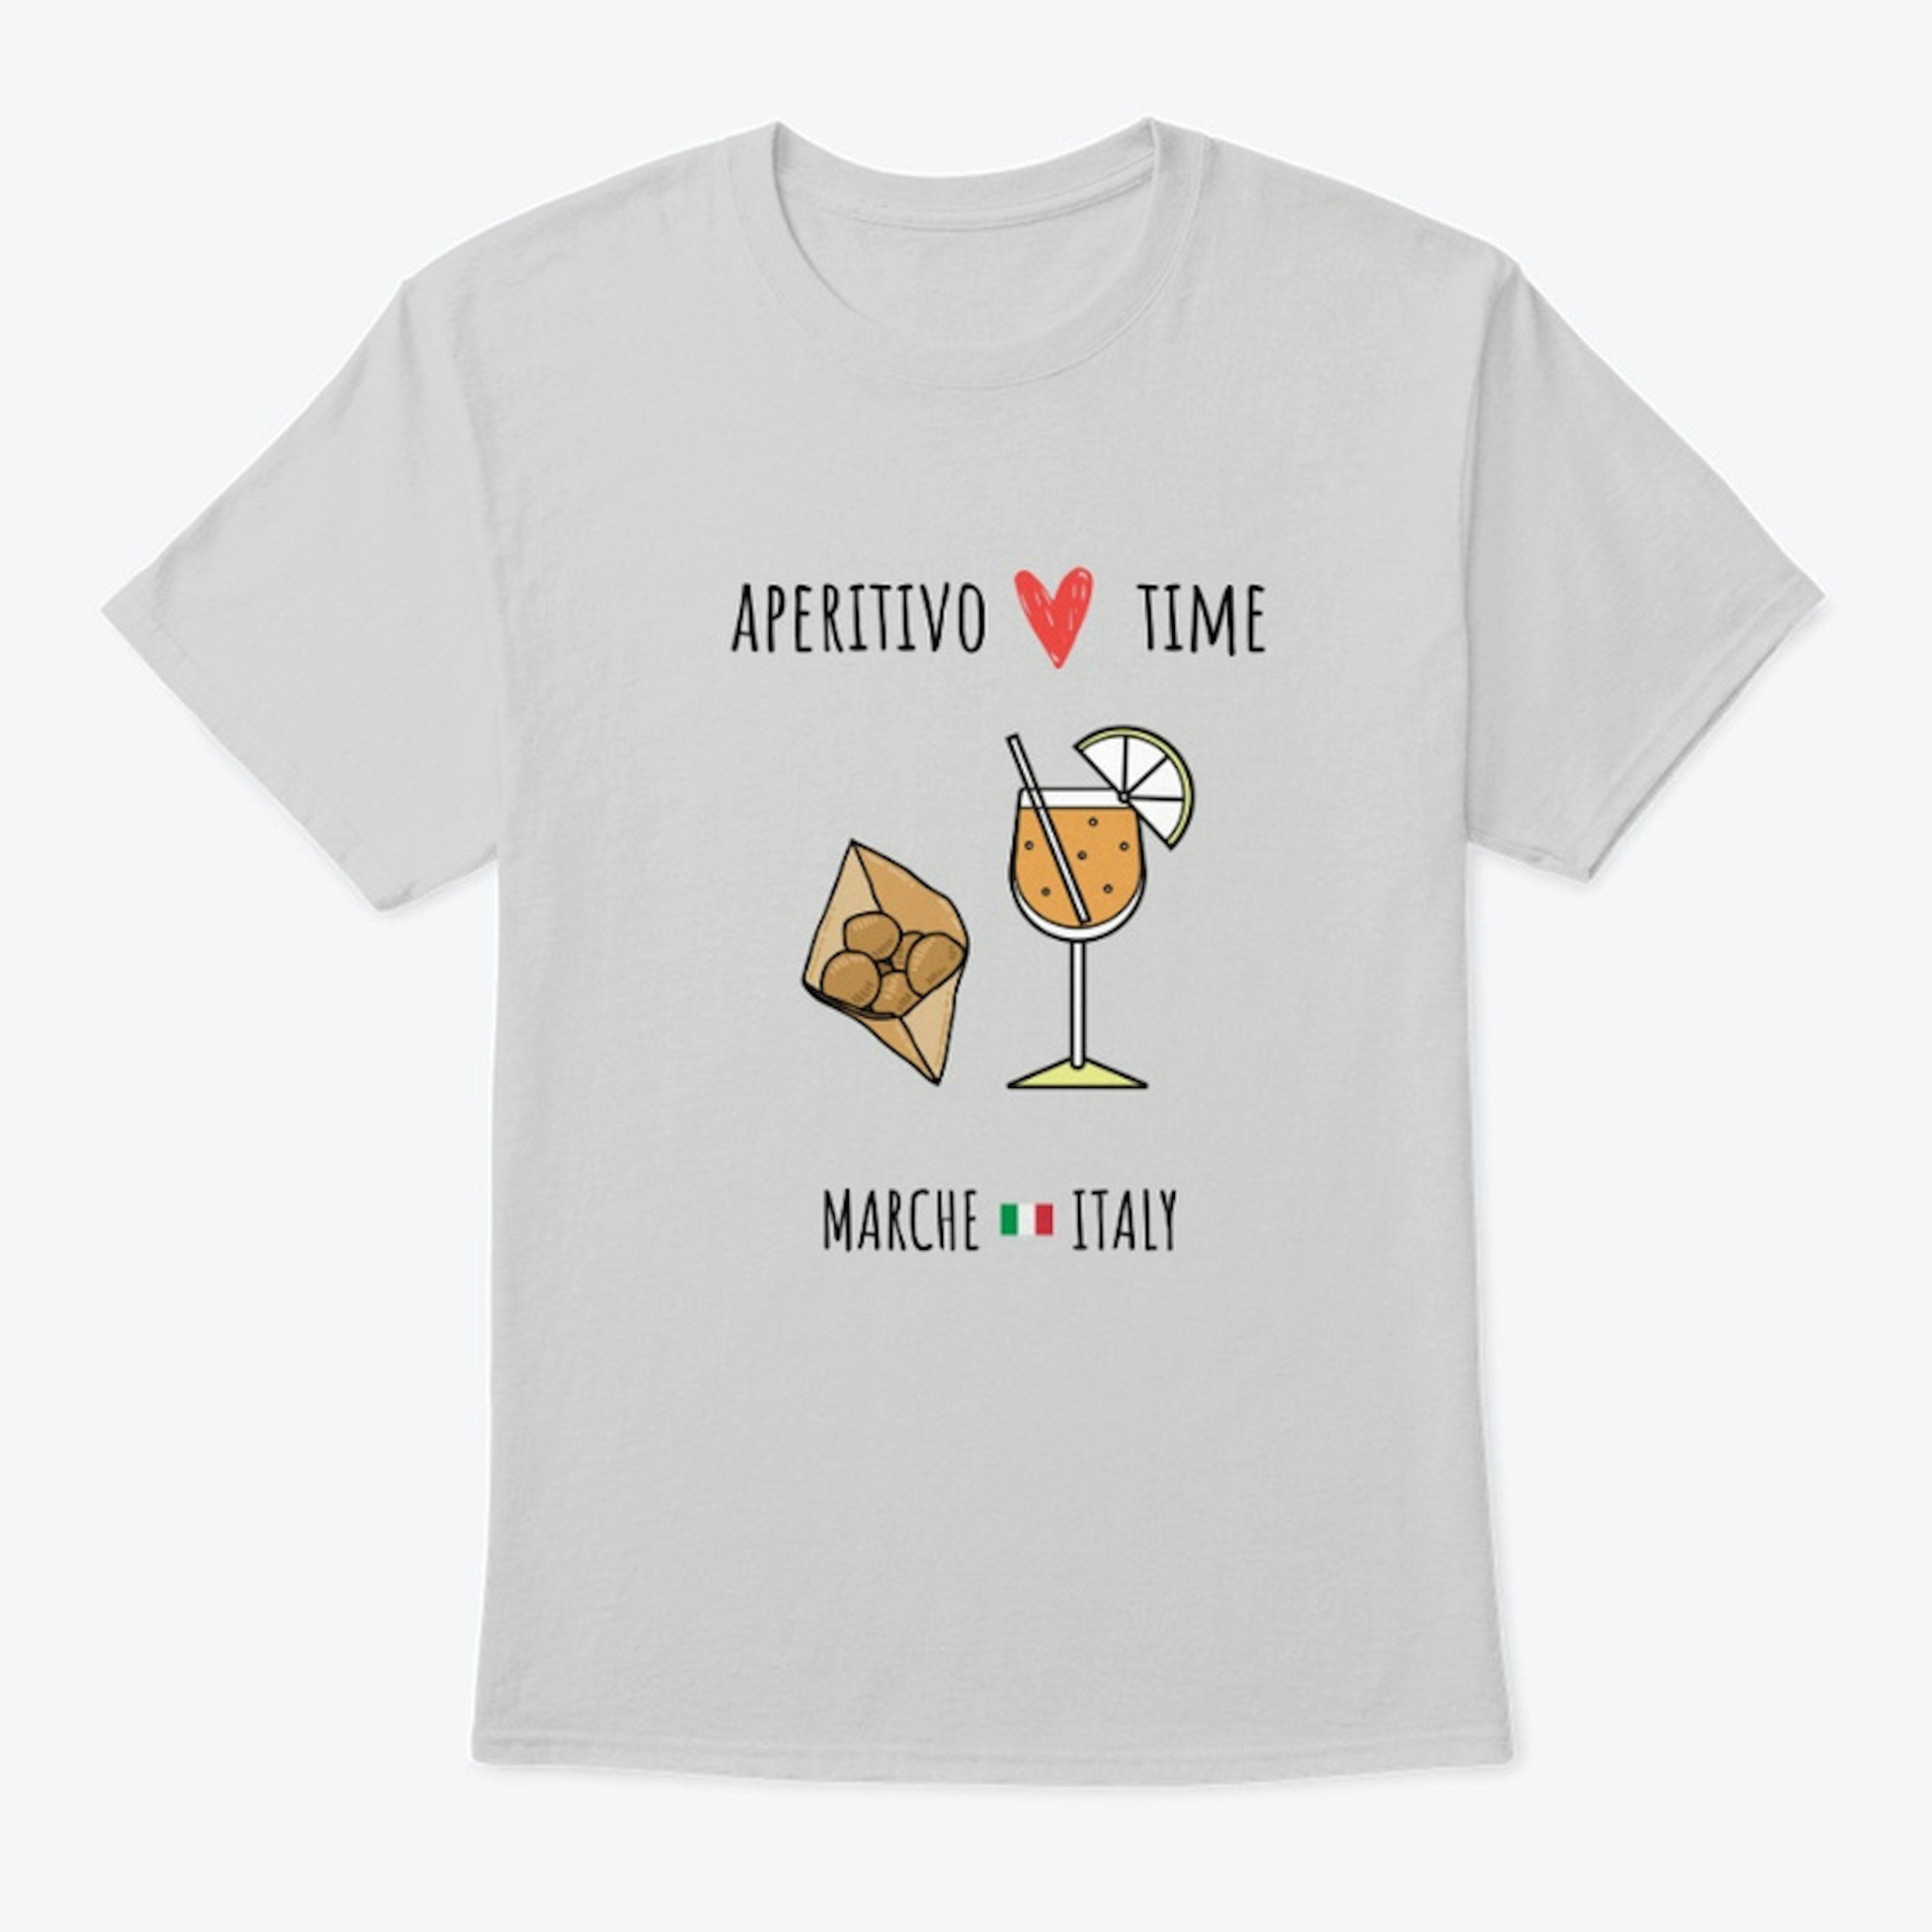  T- Shirt Aperitivo Time Marche Italy